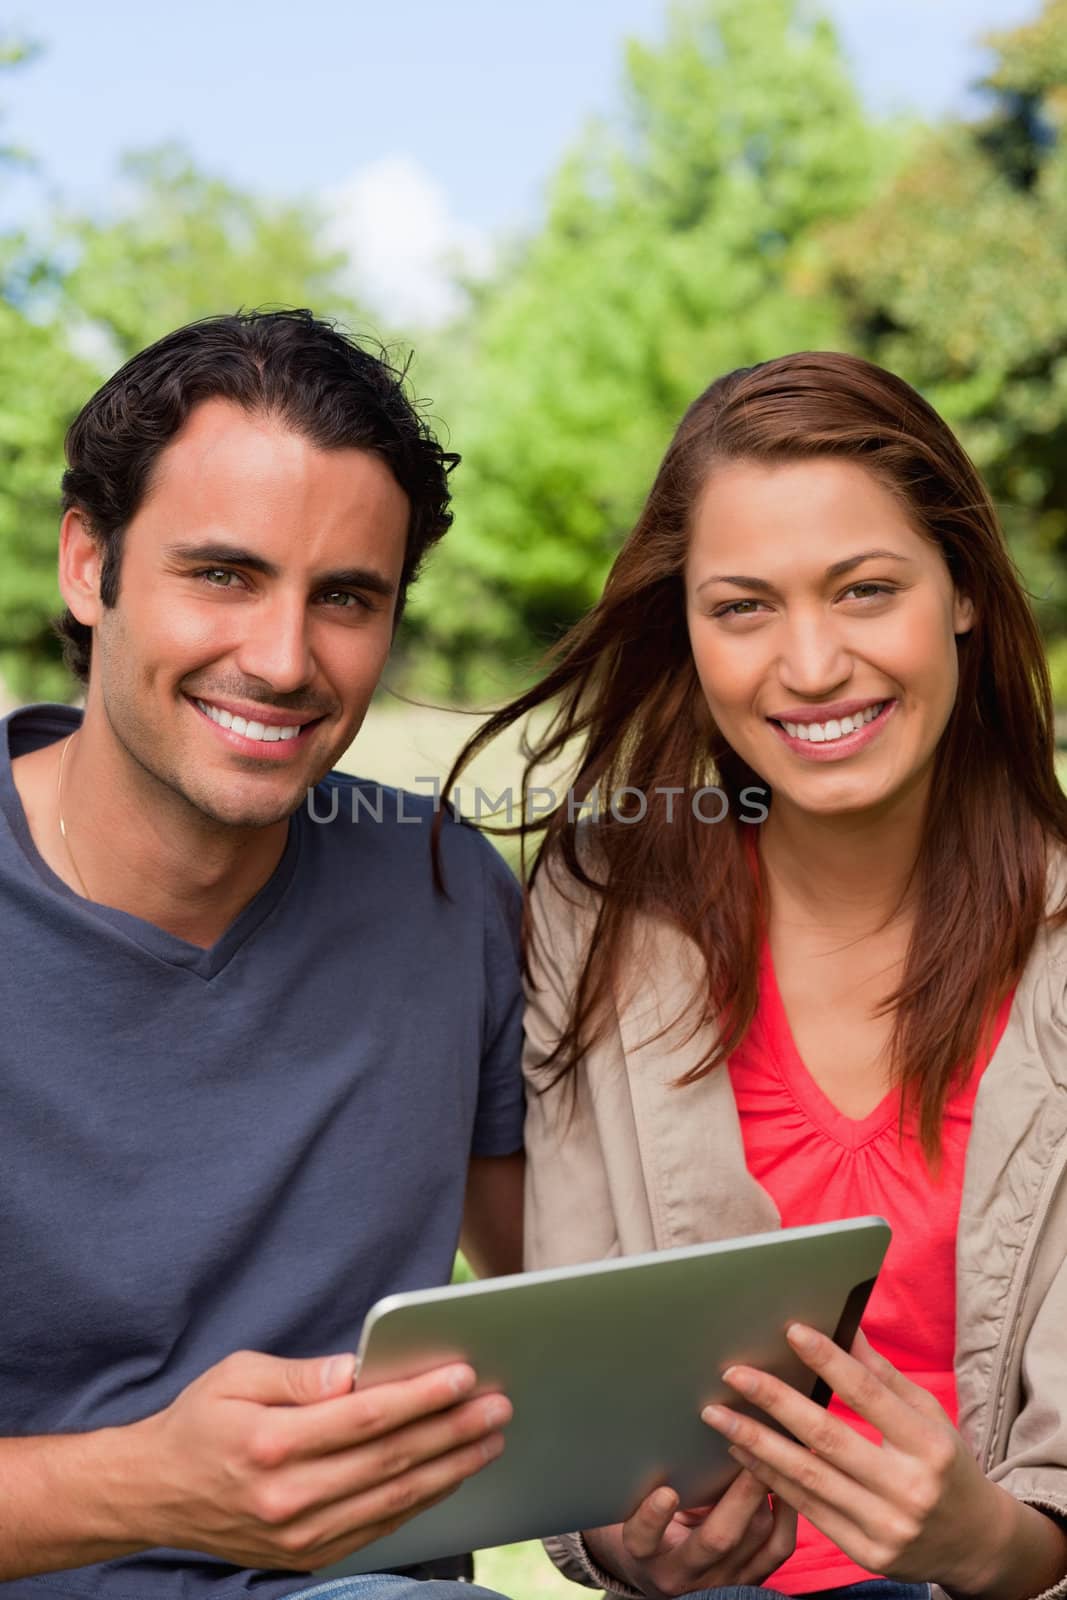 Man and a woman look ahead while holding a tablet in a sunny parkland environment